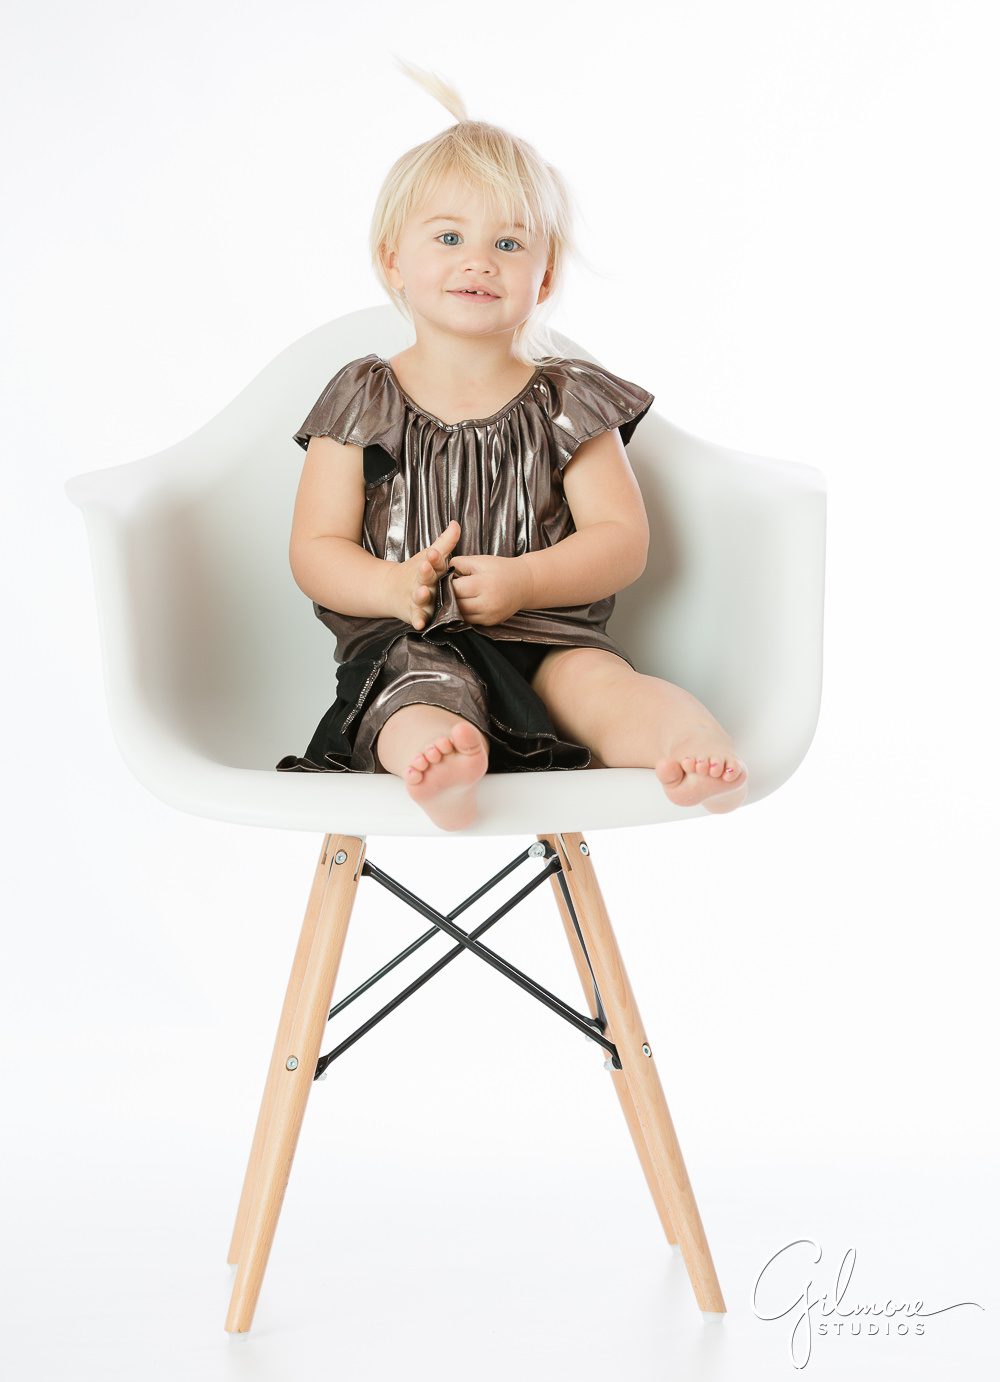 Mommy and me portrait, 2 years old, white chair, little girl, two year old